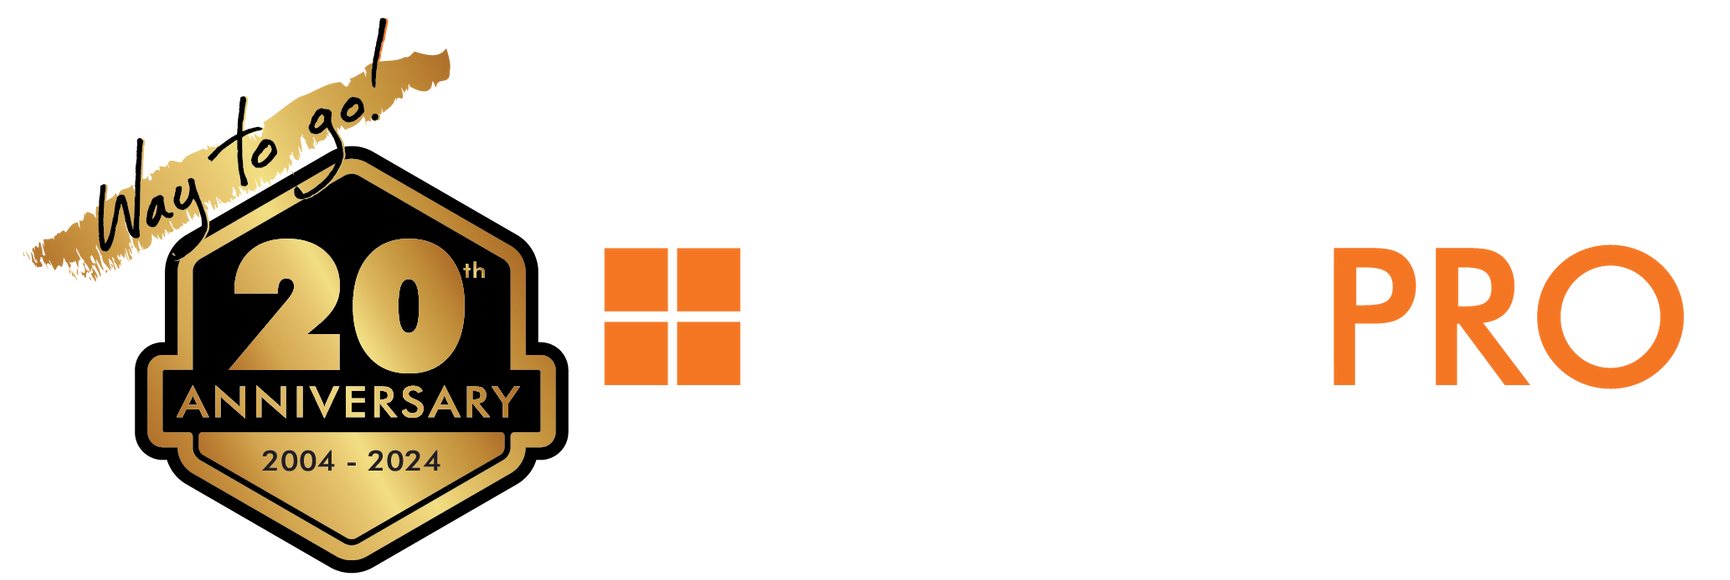 Building Product Supply